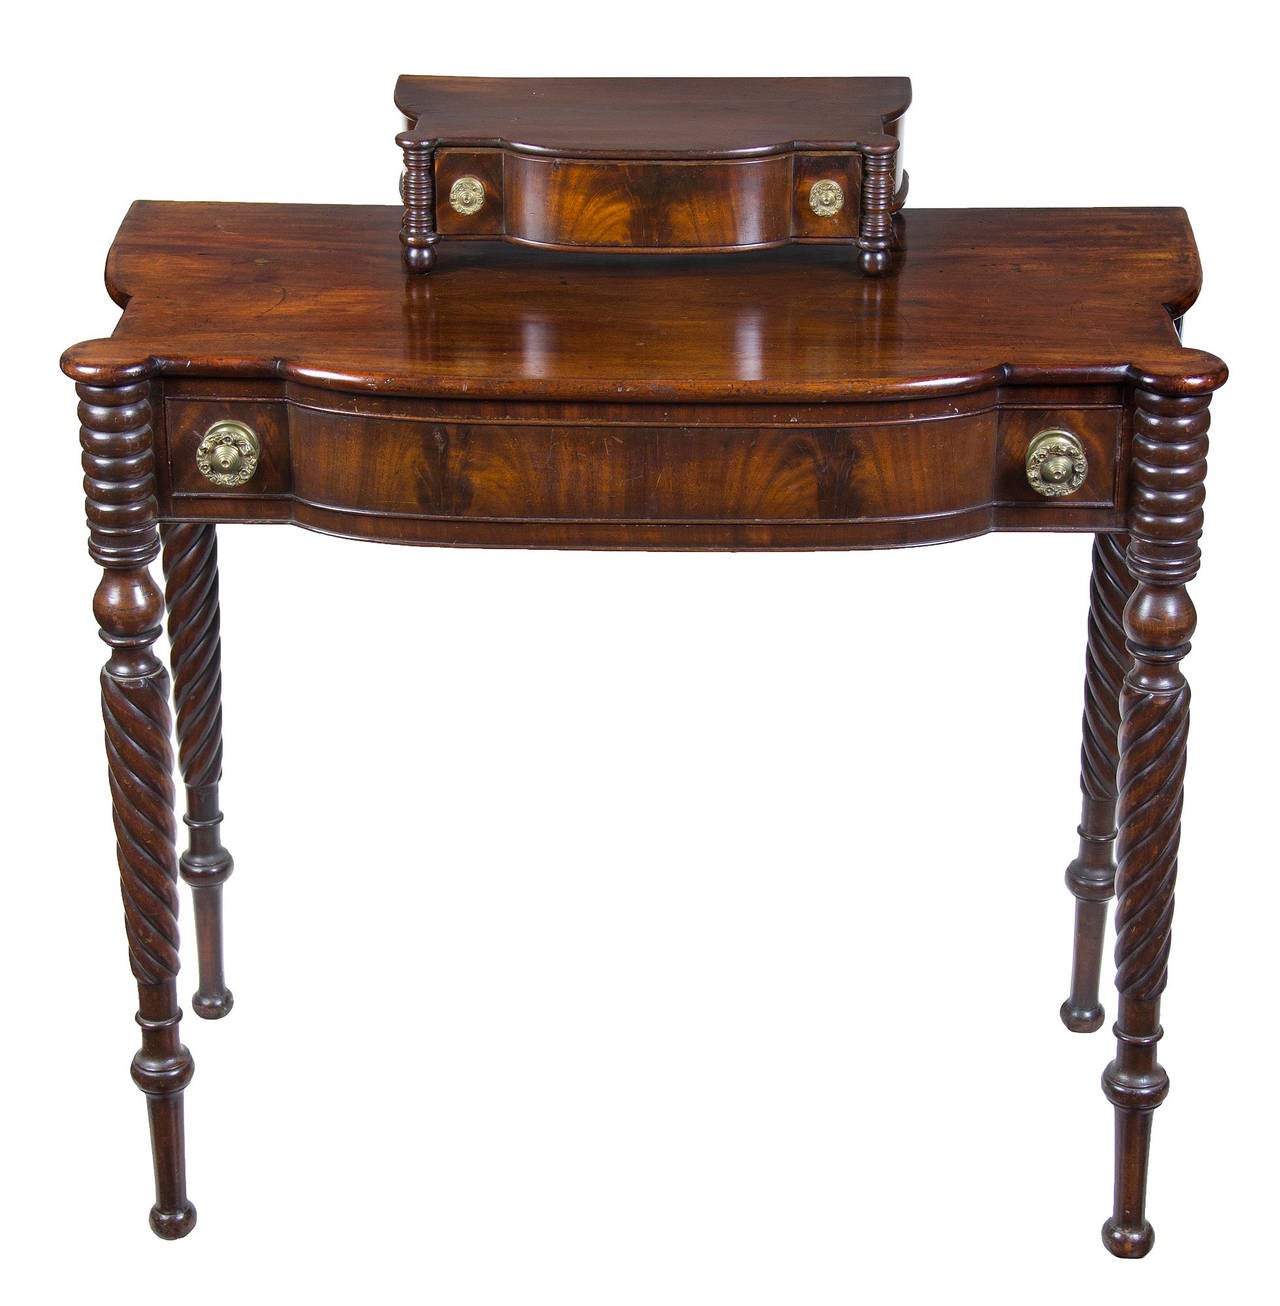 This is an extremely well-preserved North Shore piece with its original brasses. The crotch mahogany veneers are bookmatched, the top of solid mahogany, and the legs are of a beautifully tapered rope turning. The overall piece has a beautiful amber